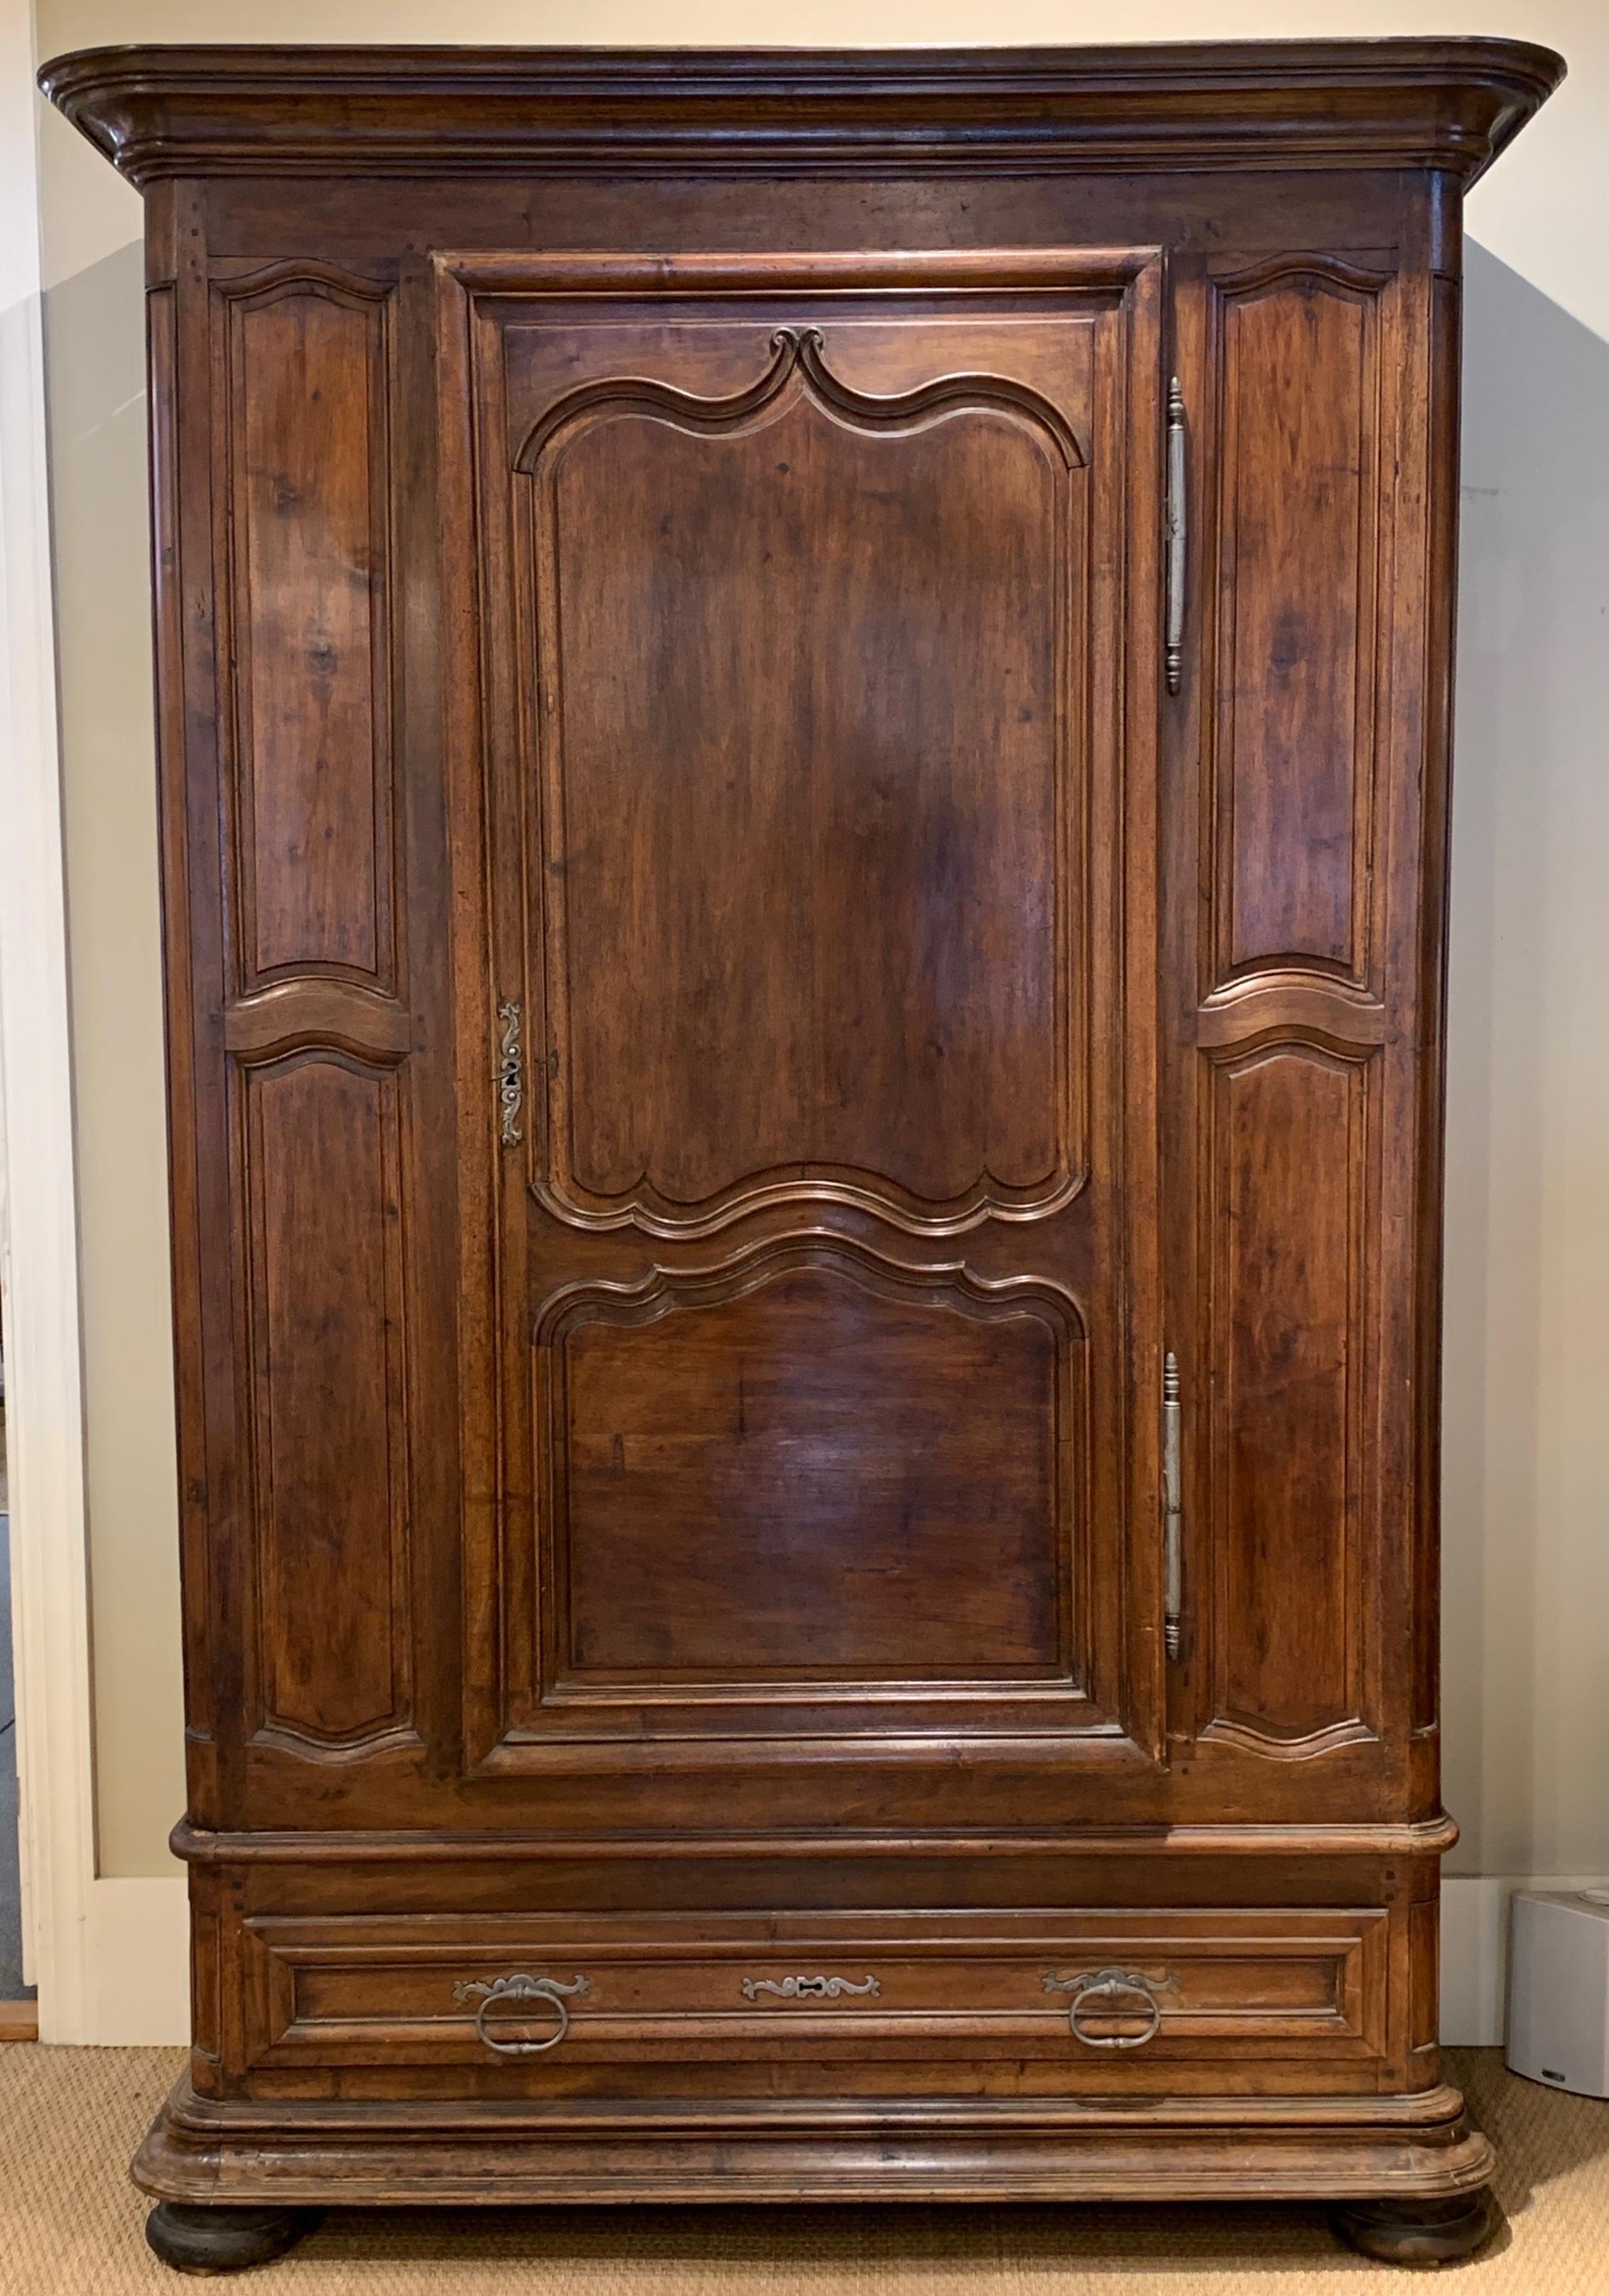 A late 18th century French heavily carved walnut armoire with single-door opening to reveal three shelves over a low single drawer all with original iron hinges, pulls and locks. The piece displays a beautiful carved crown and all rests on large bun